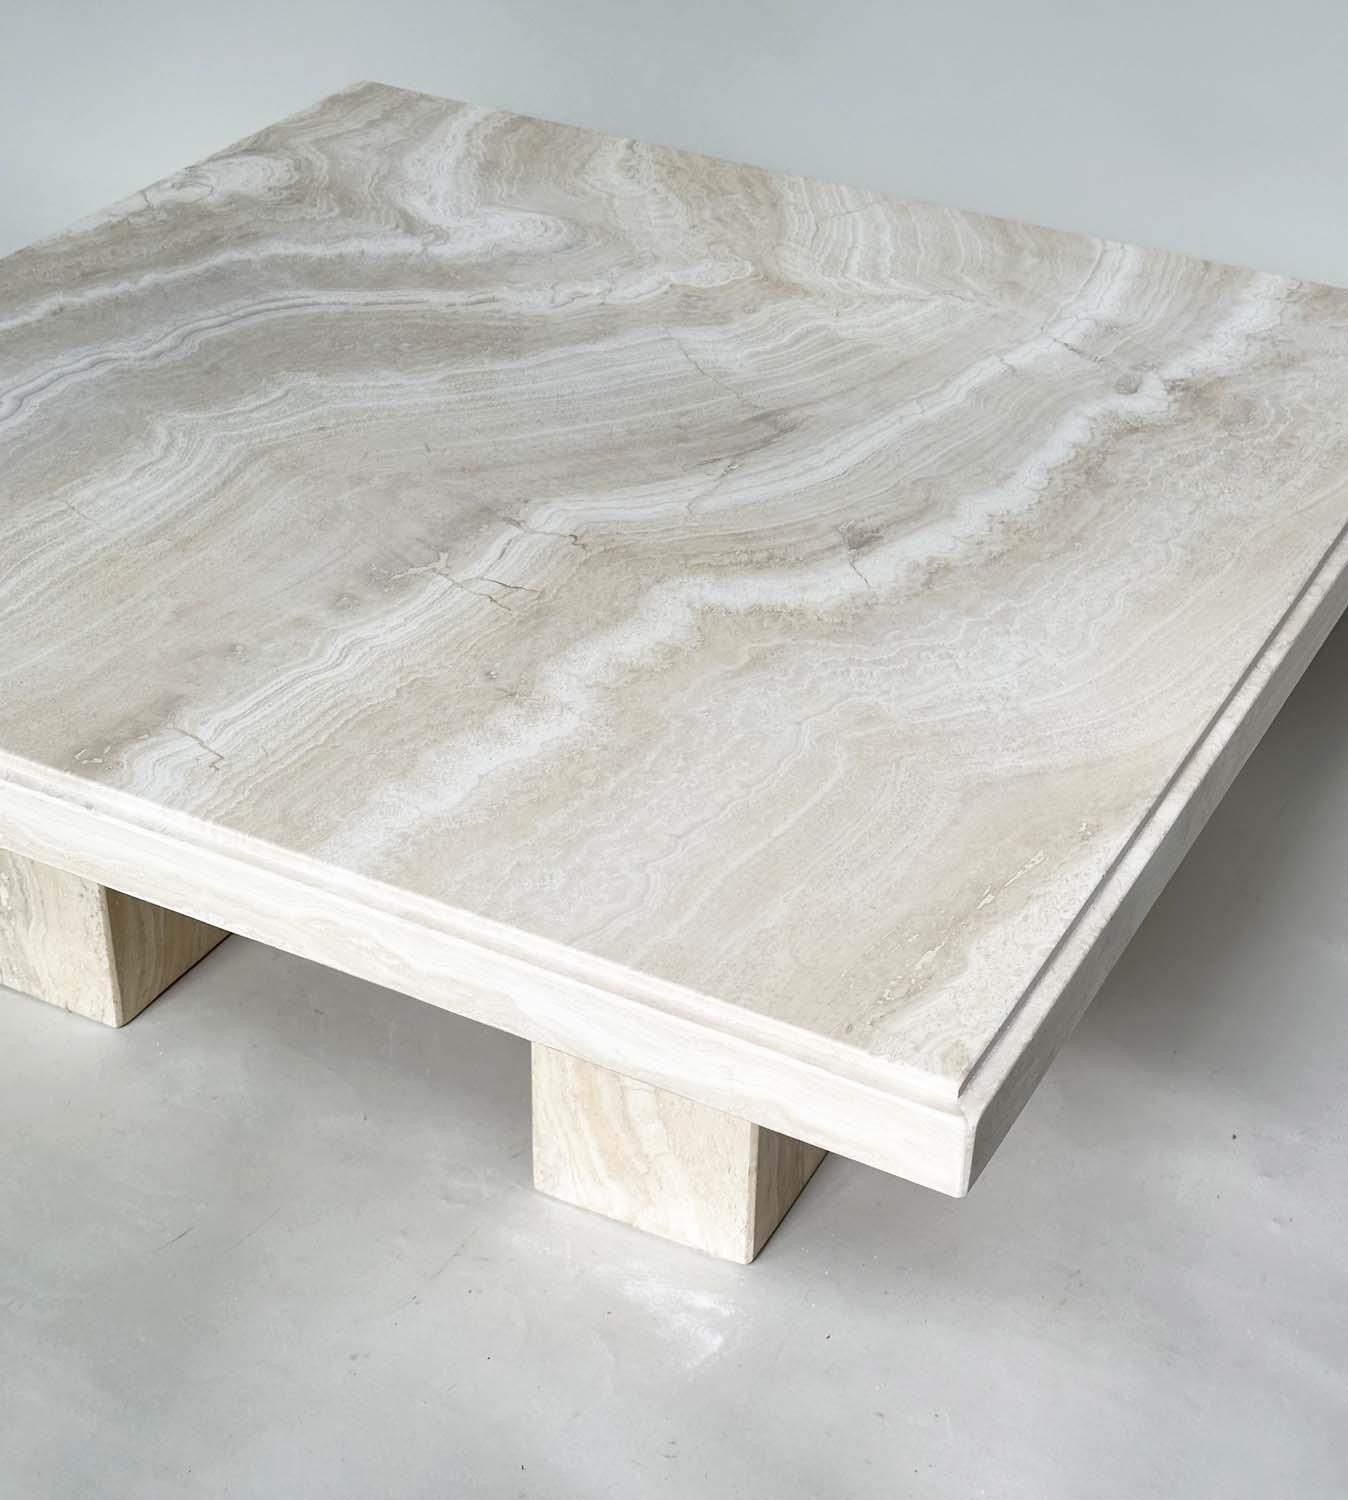 TRAVERTINE LOW TABLE, 1970's Italian travertine marble square with plinth support, 100cm x 100cm x - Image 4 of 9